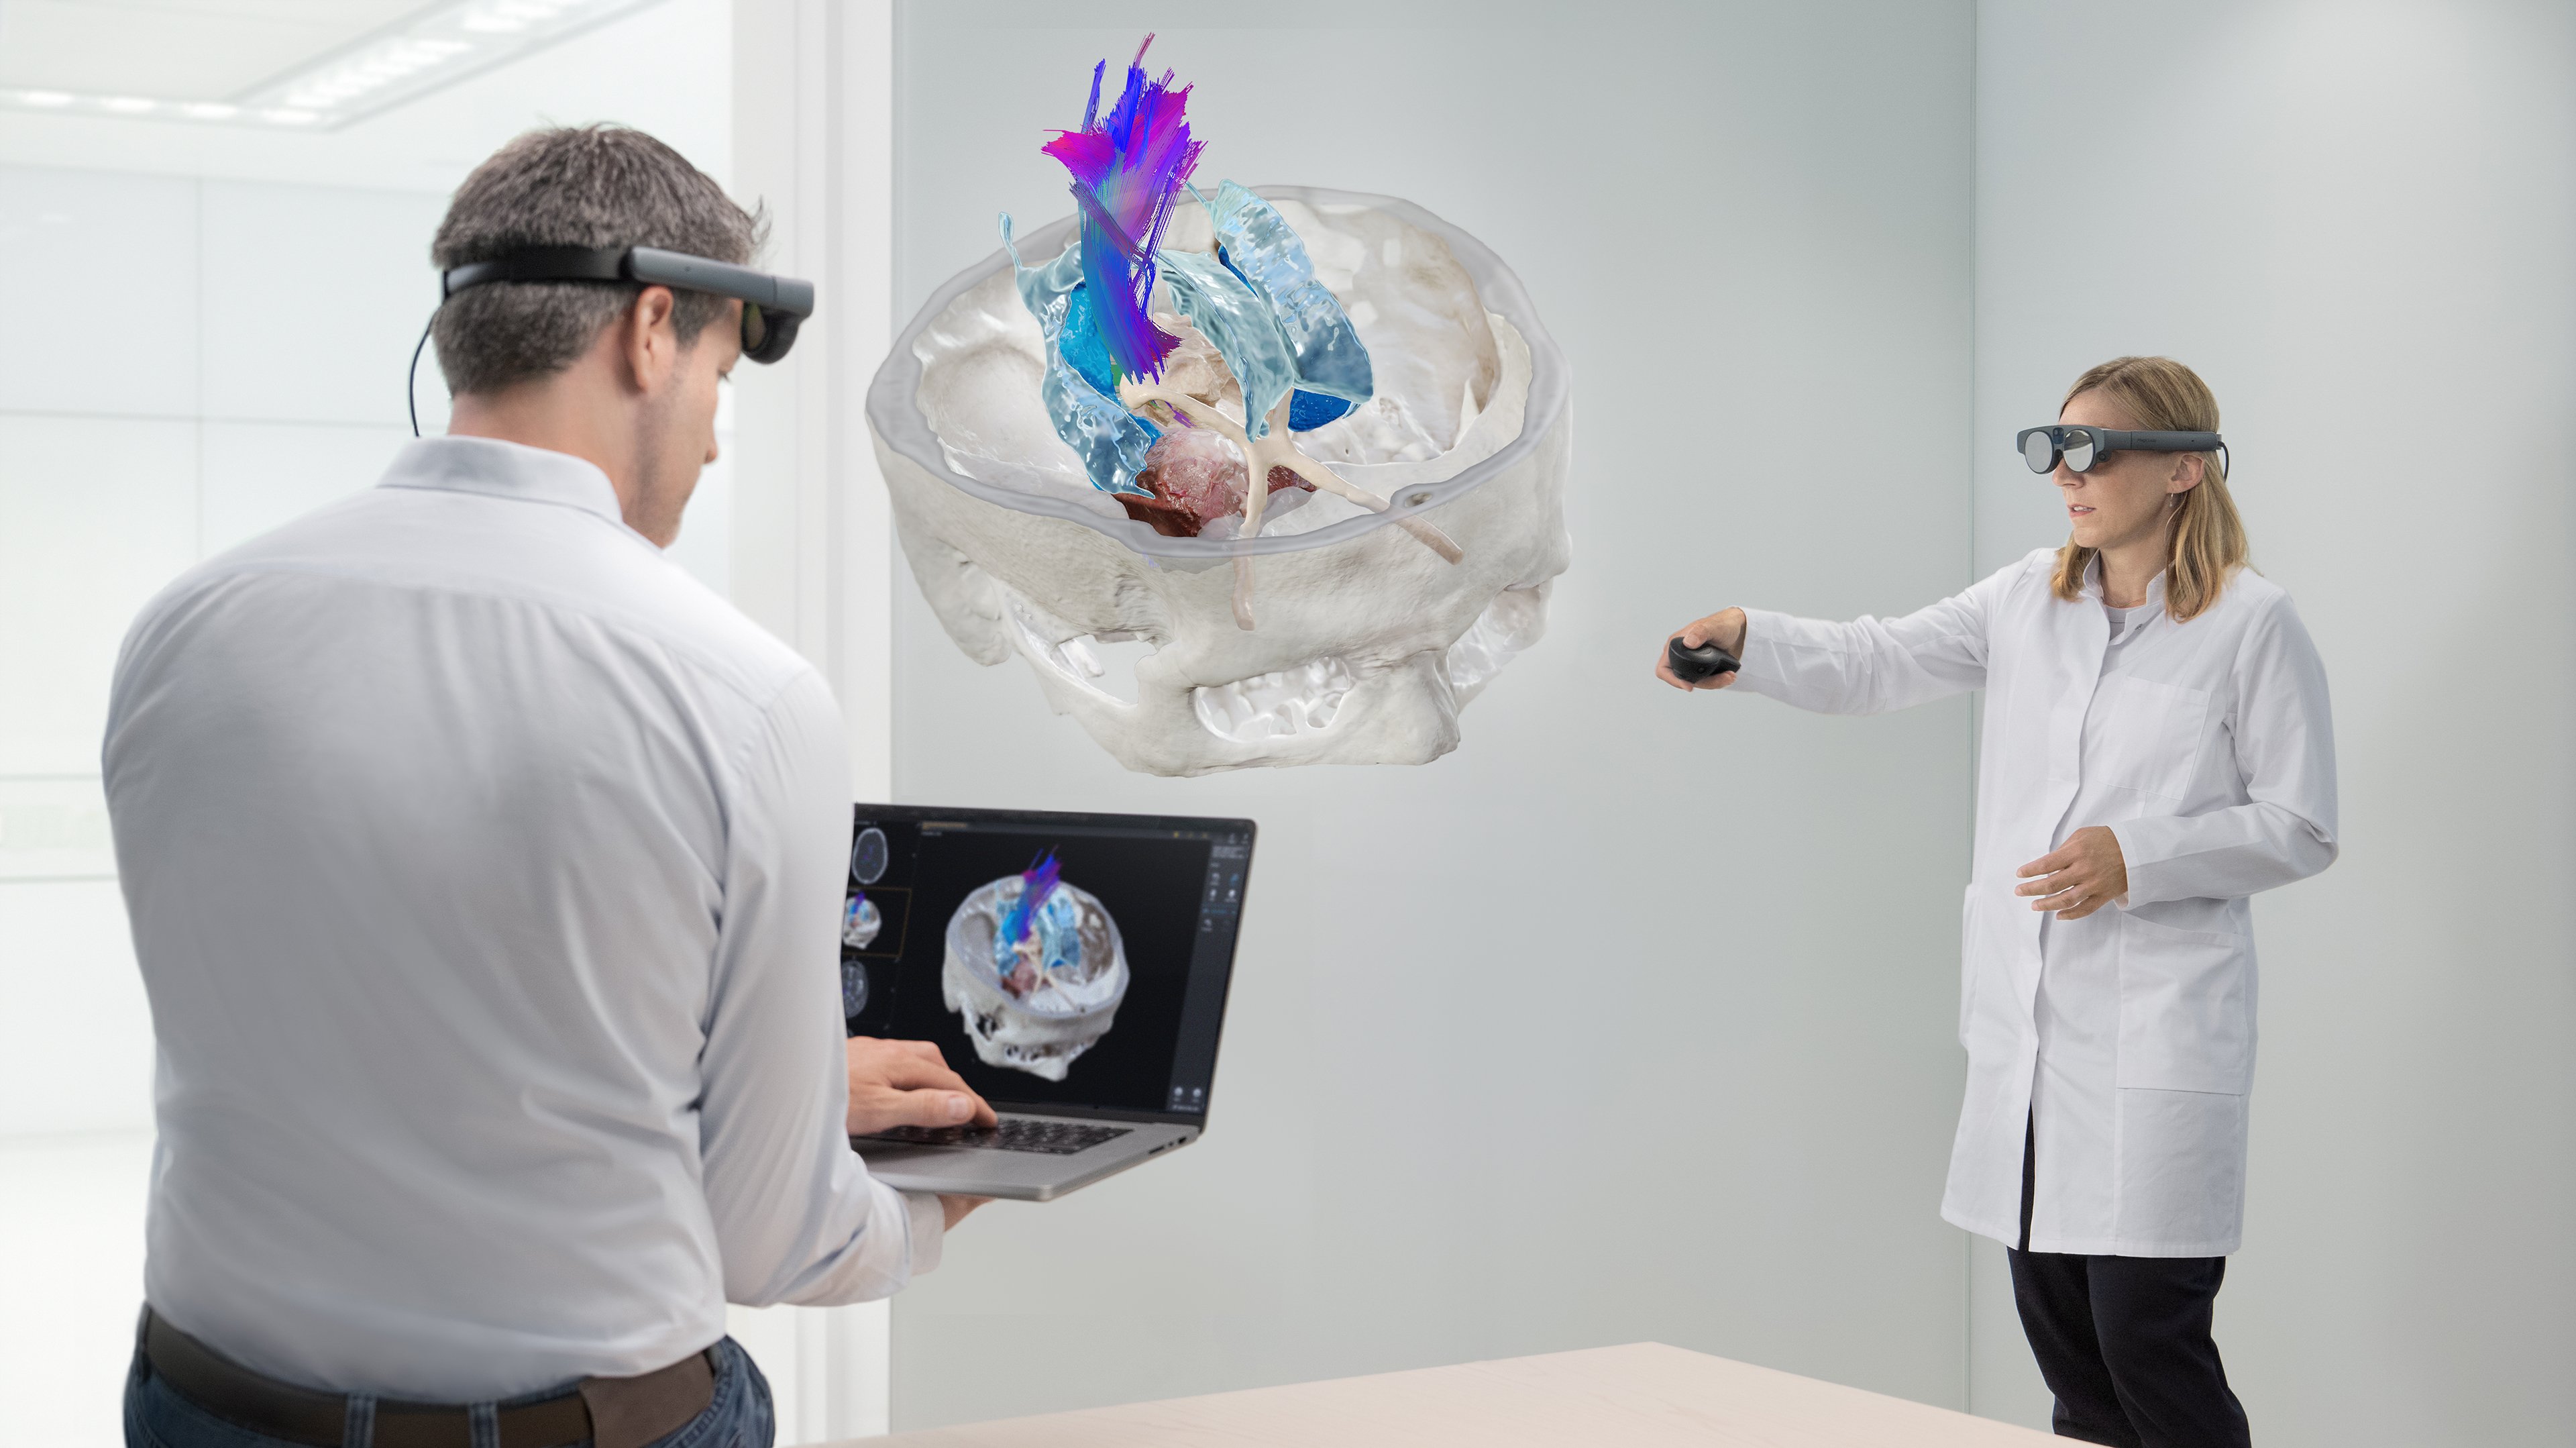 Brainlab's Mixed Reality Viewer in action, utilized by two individuals in an office setting